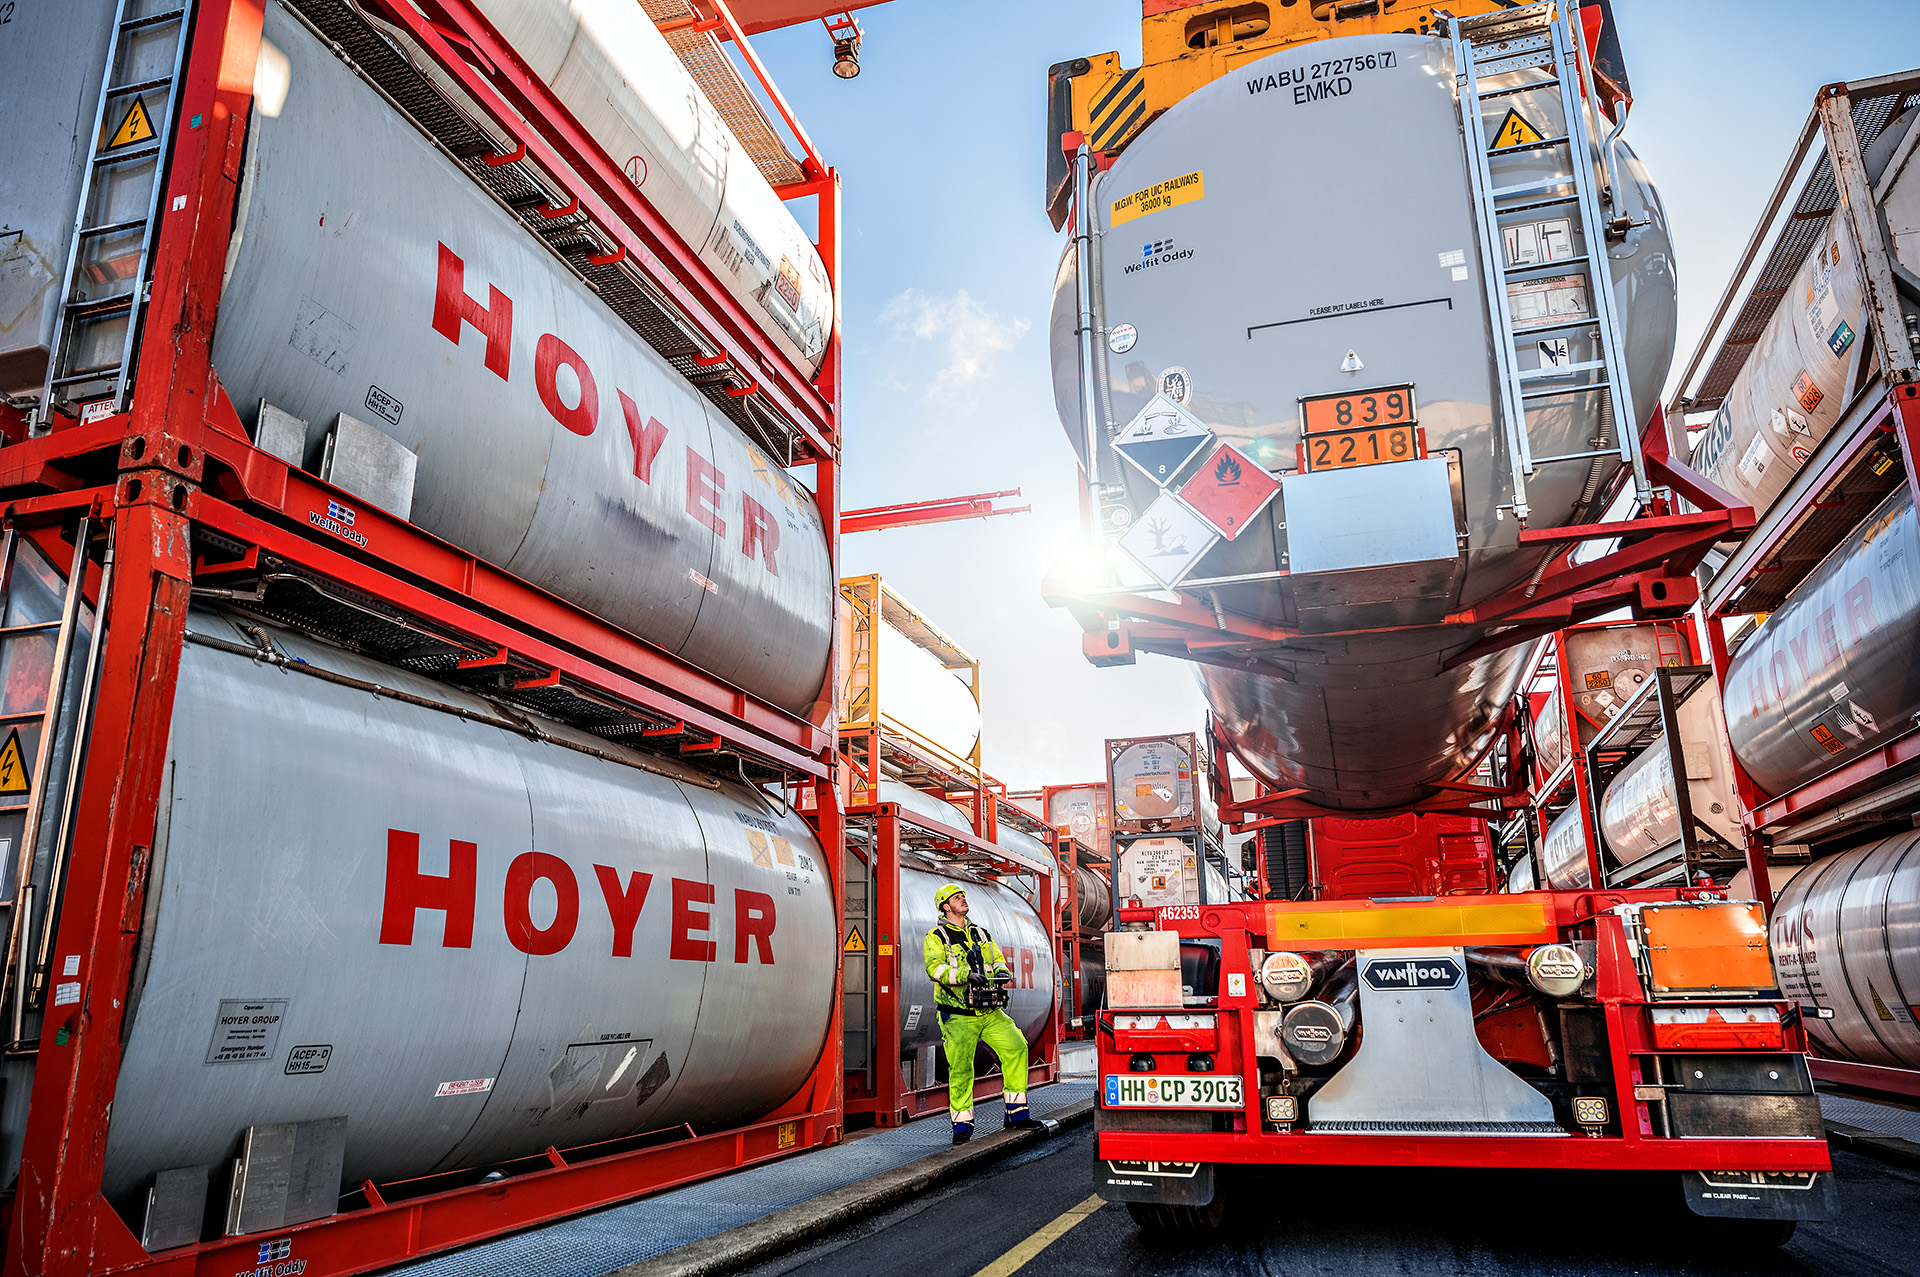 HOYER tank container lifted by a crane at the hazardous goods terminal.